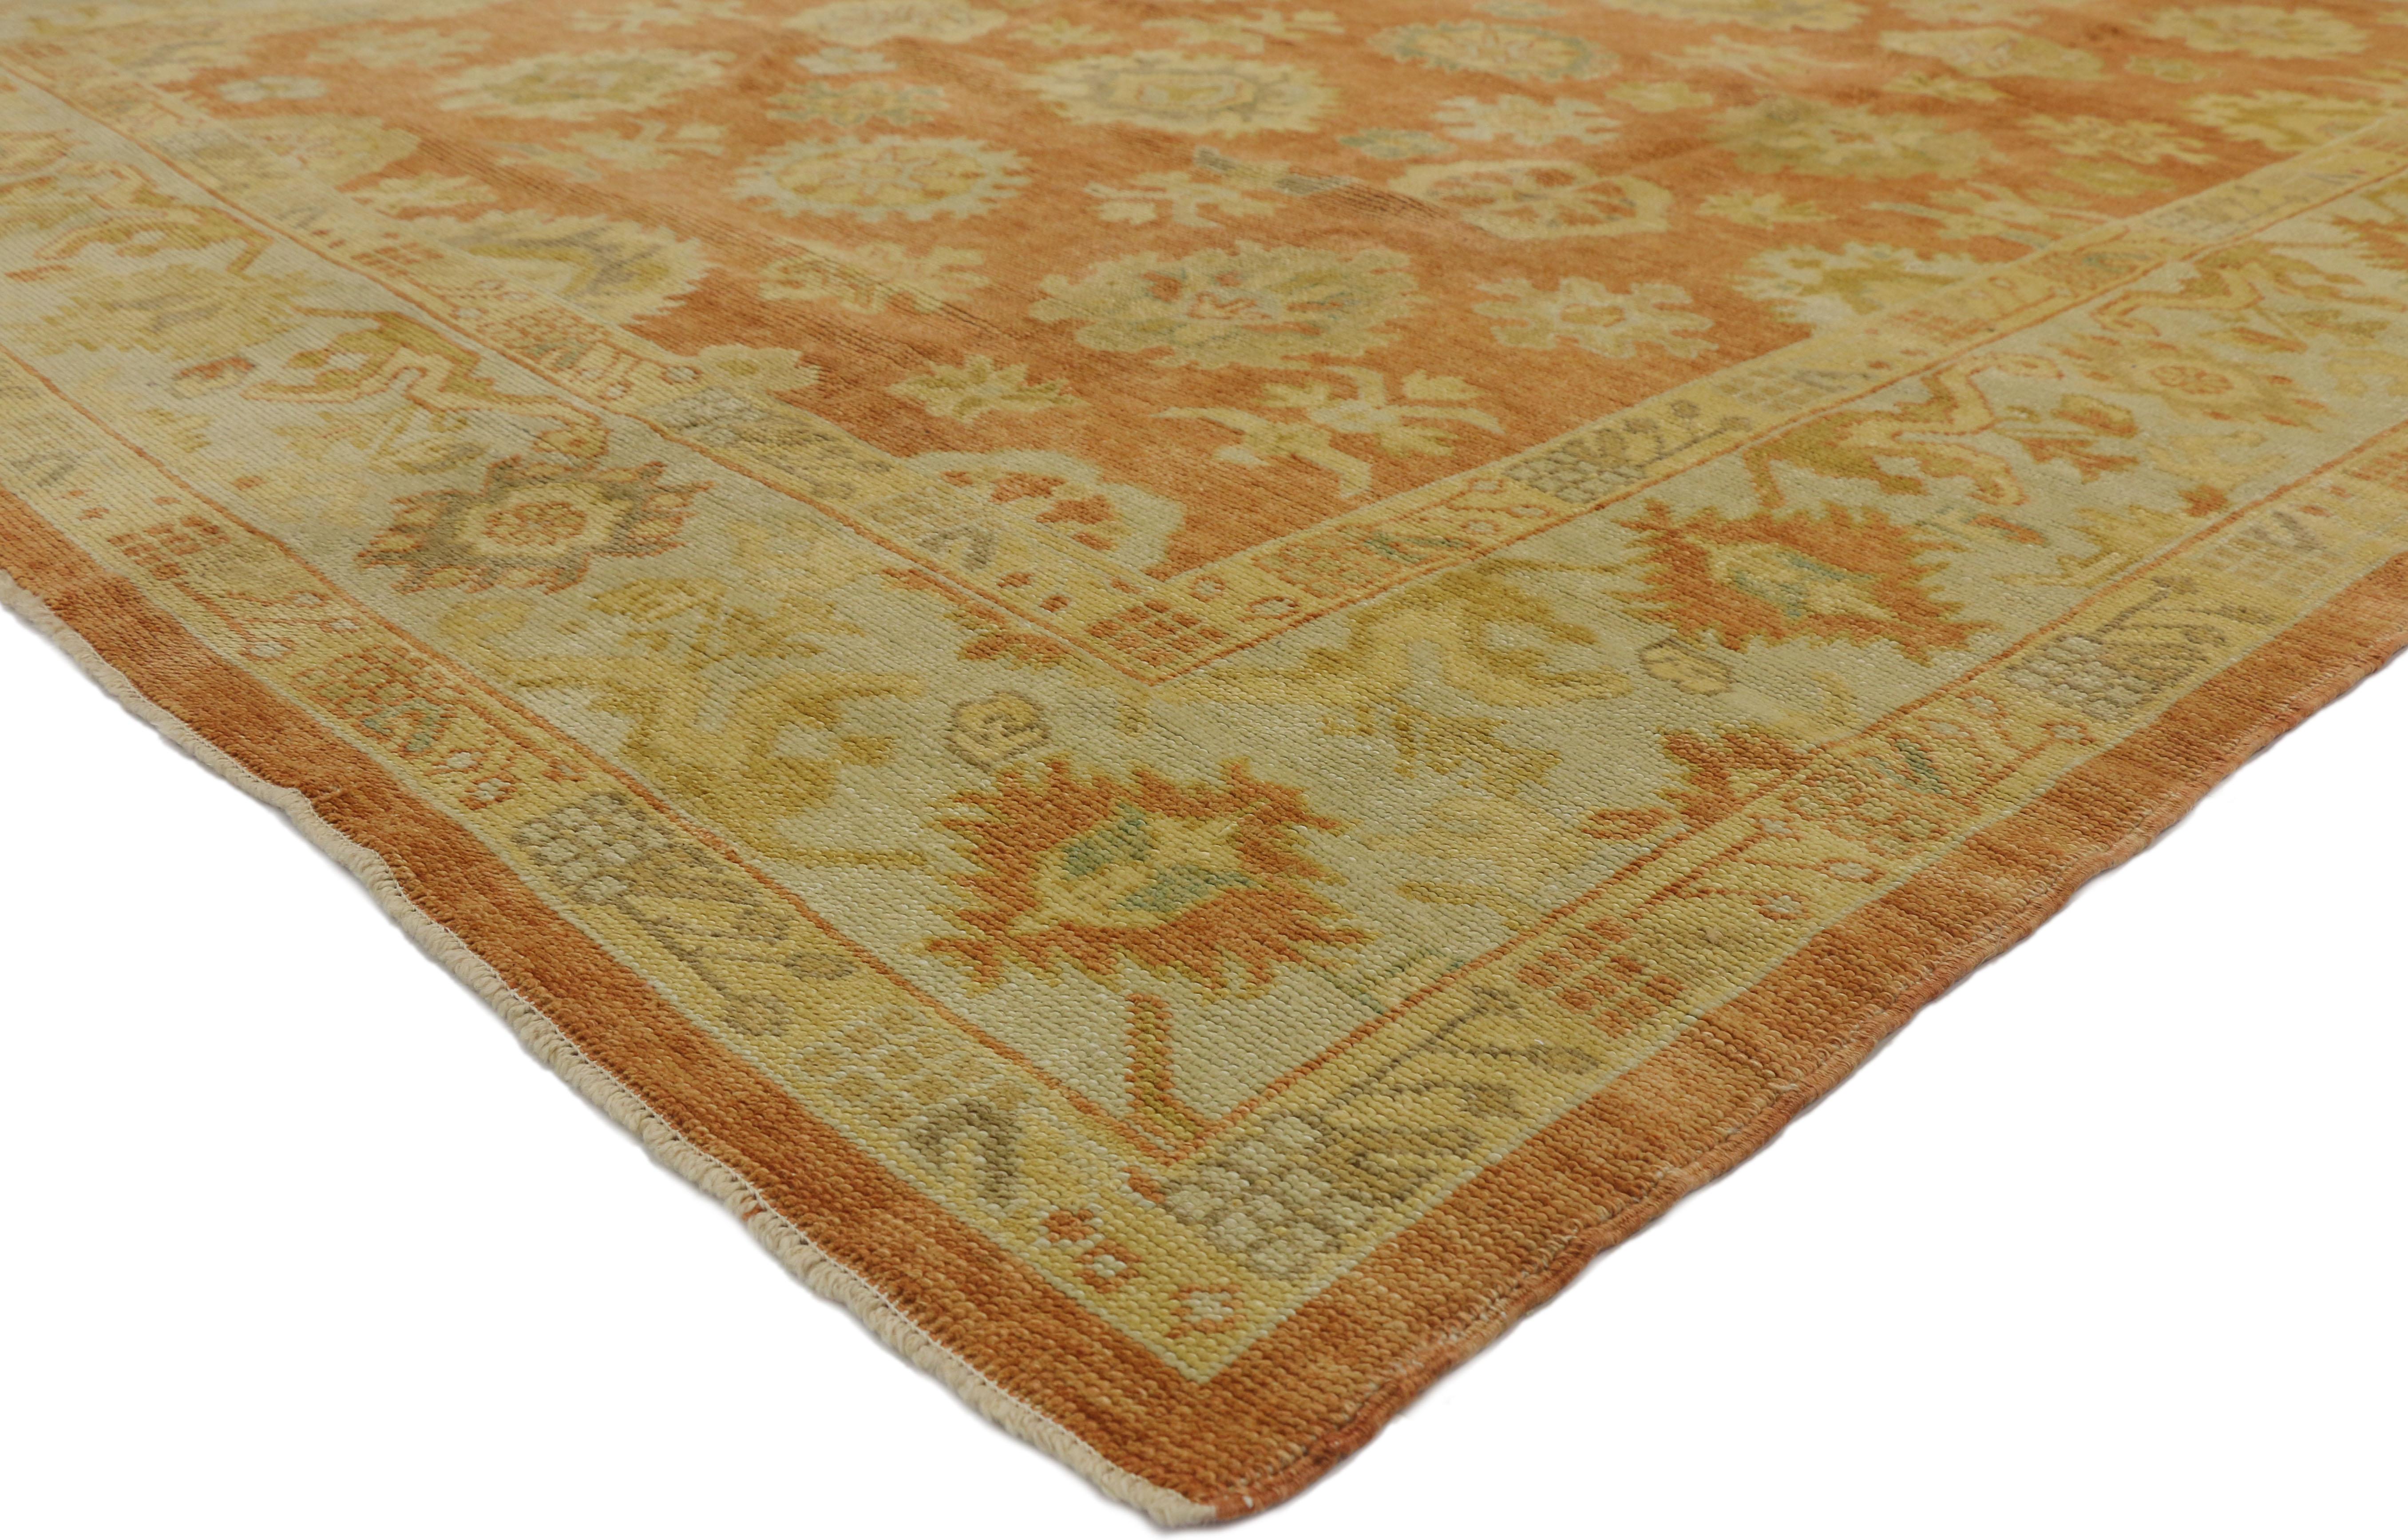 50536 new Contemporary Turkish Oushak rug with rustic Tuscan style. This hand knotted wool contemporary Oushak area rug features an all-over geometric pattern composed of Harshang-style motifs, blooming palmettes, leafy tendrils, and organic shapes